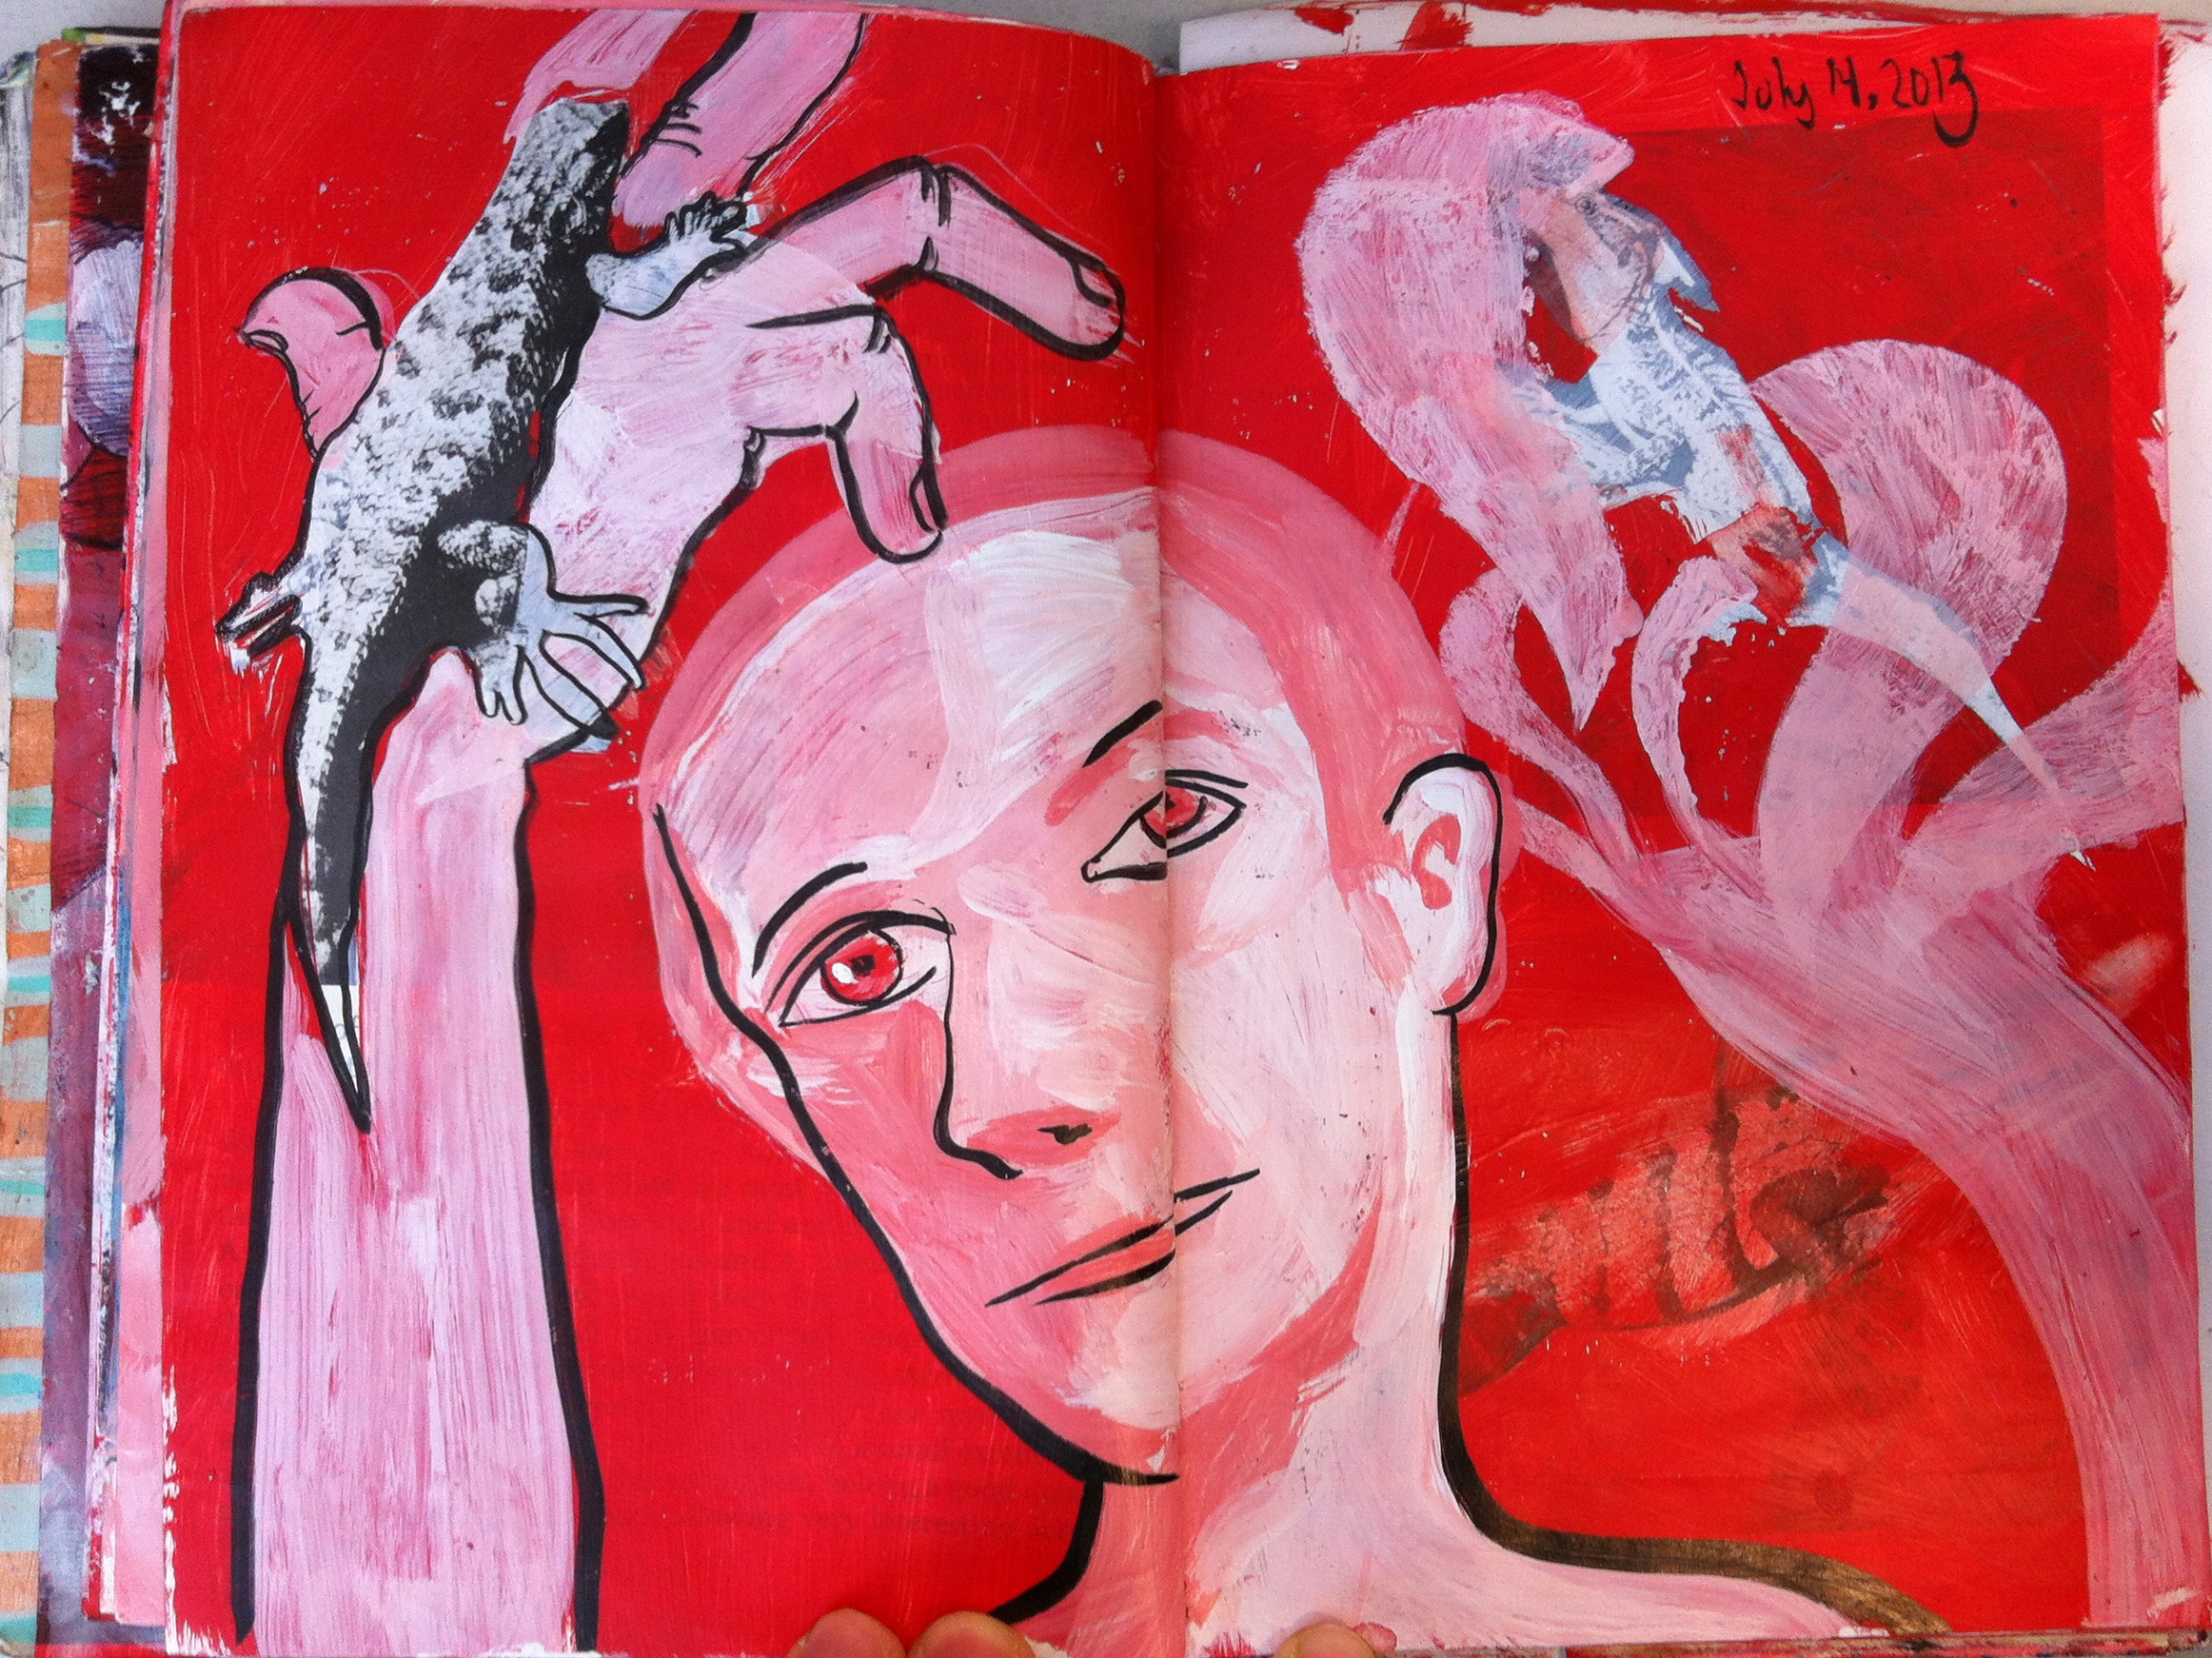 Ink drawing of man looking at hands and lizards, on red background with white 